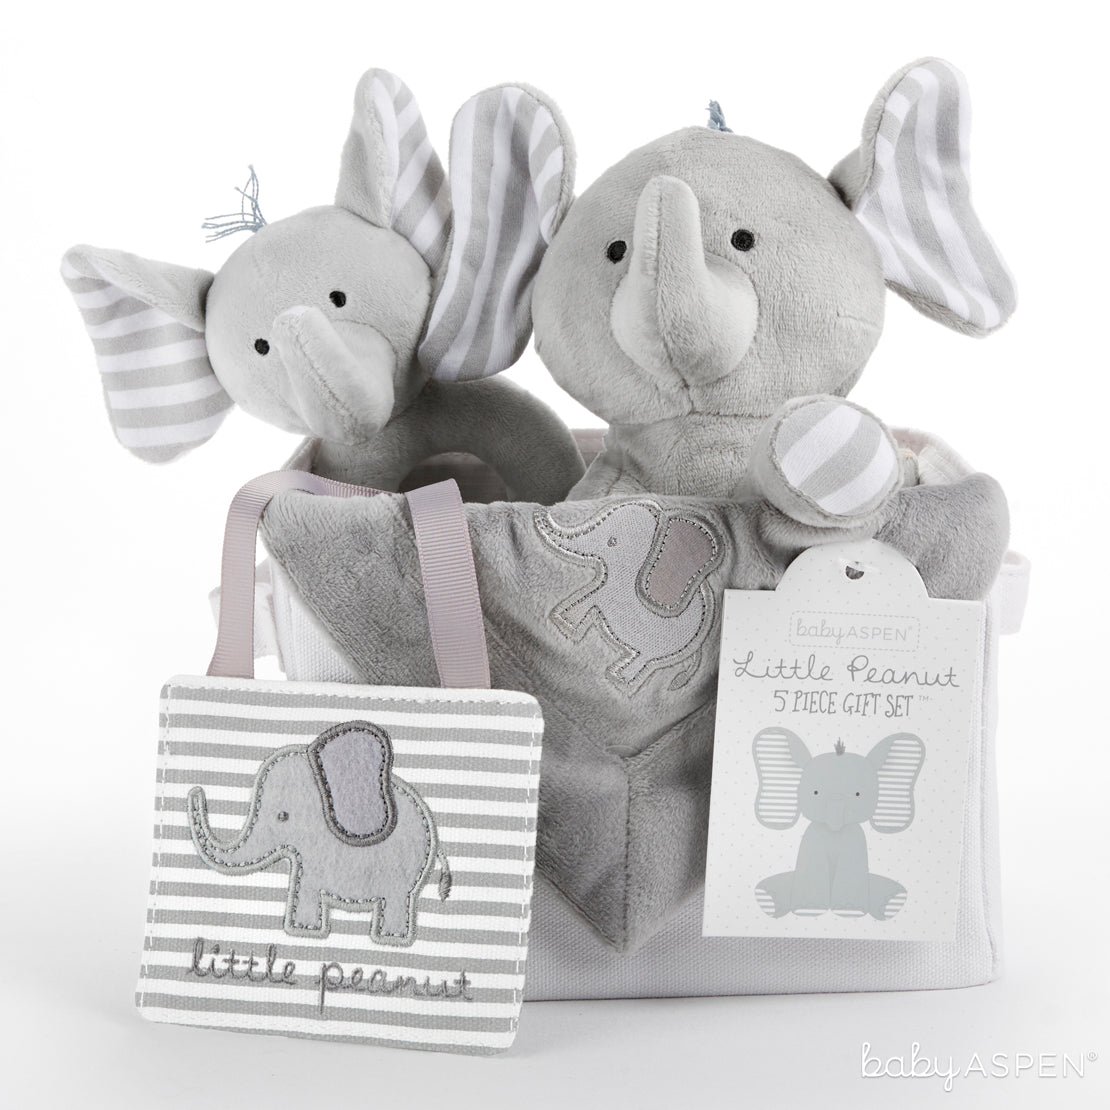 Elephant 5 Piece Gift Set | Sweet Elephant Themed Gifts For Your Little Peanut | Baby Aspen